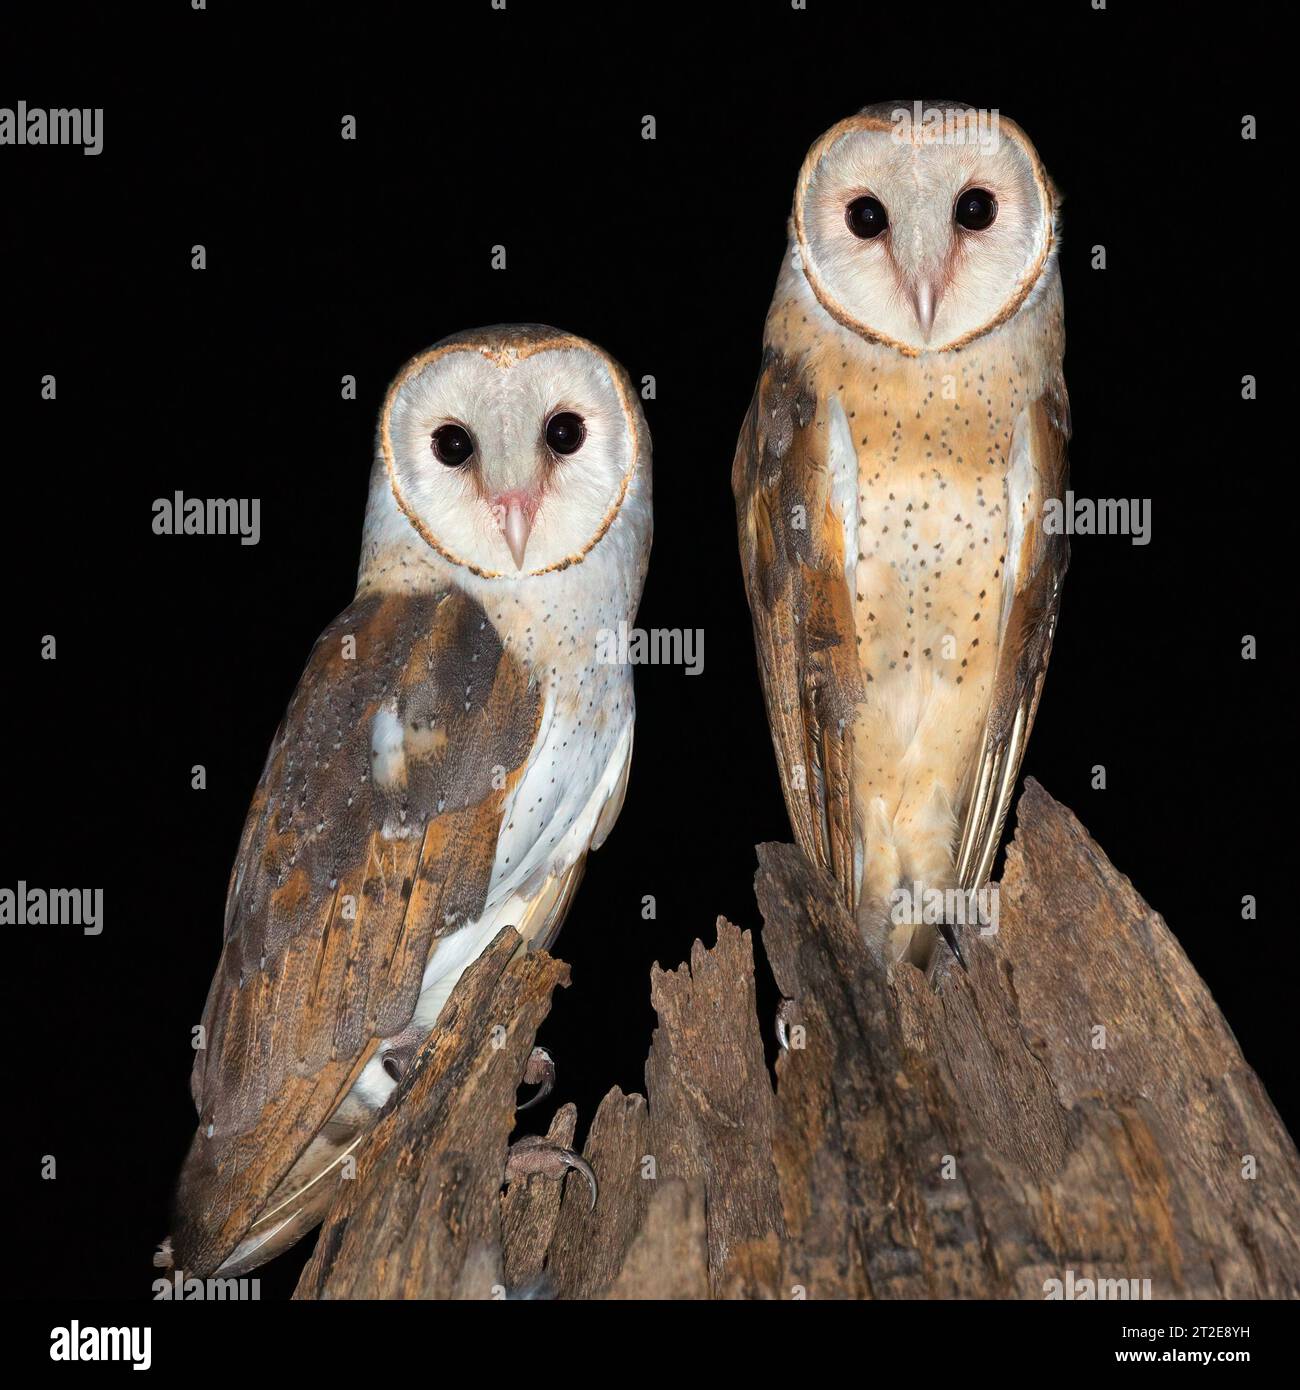 The owls look straight at the photographer CHANDIGARH, INDIA A SNAP of two barn owls creating the perfect heart have been captured.  Images show the b Stock Photo